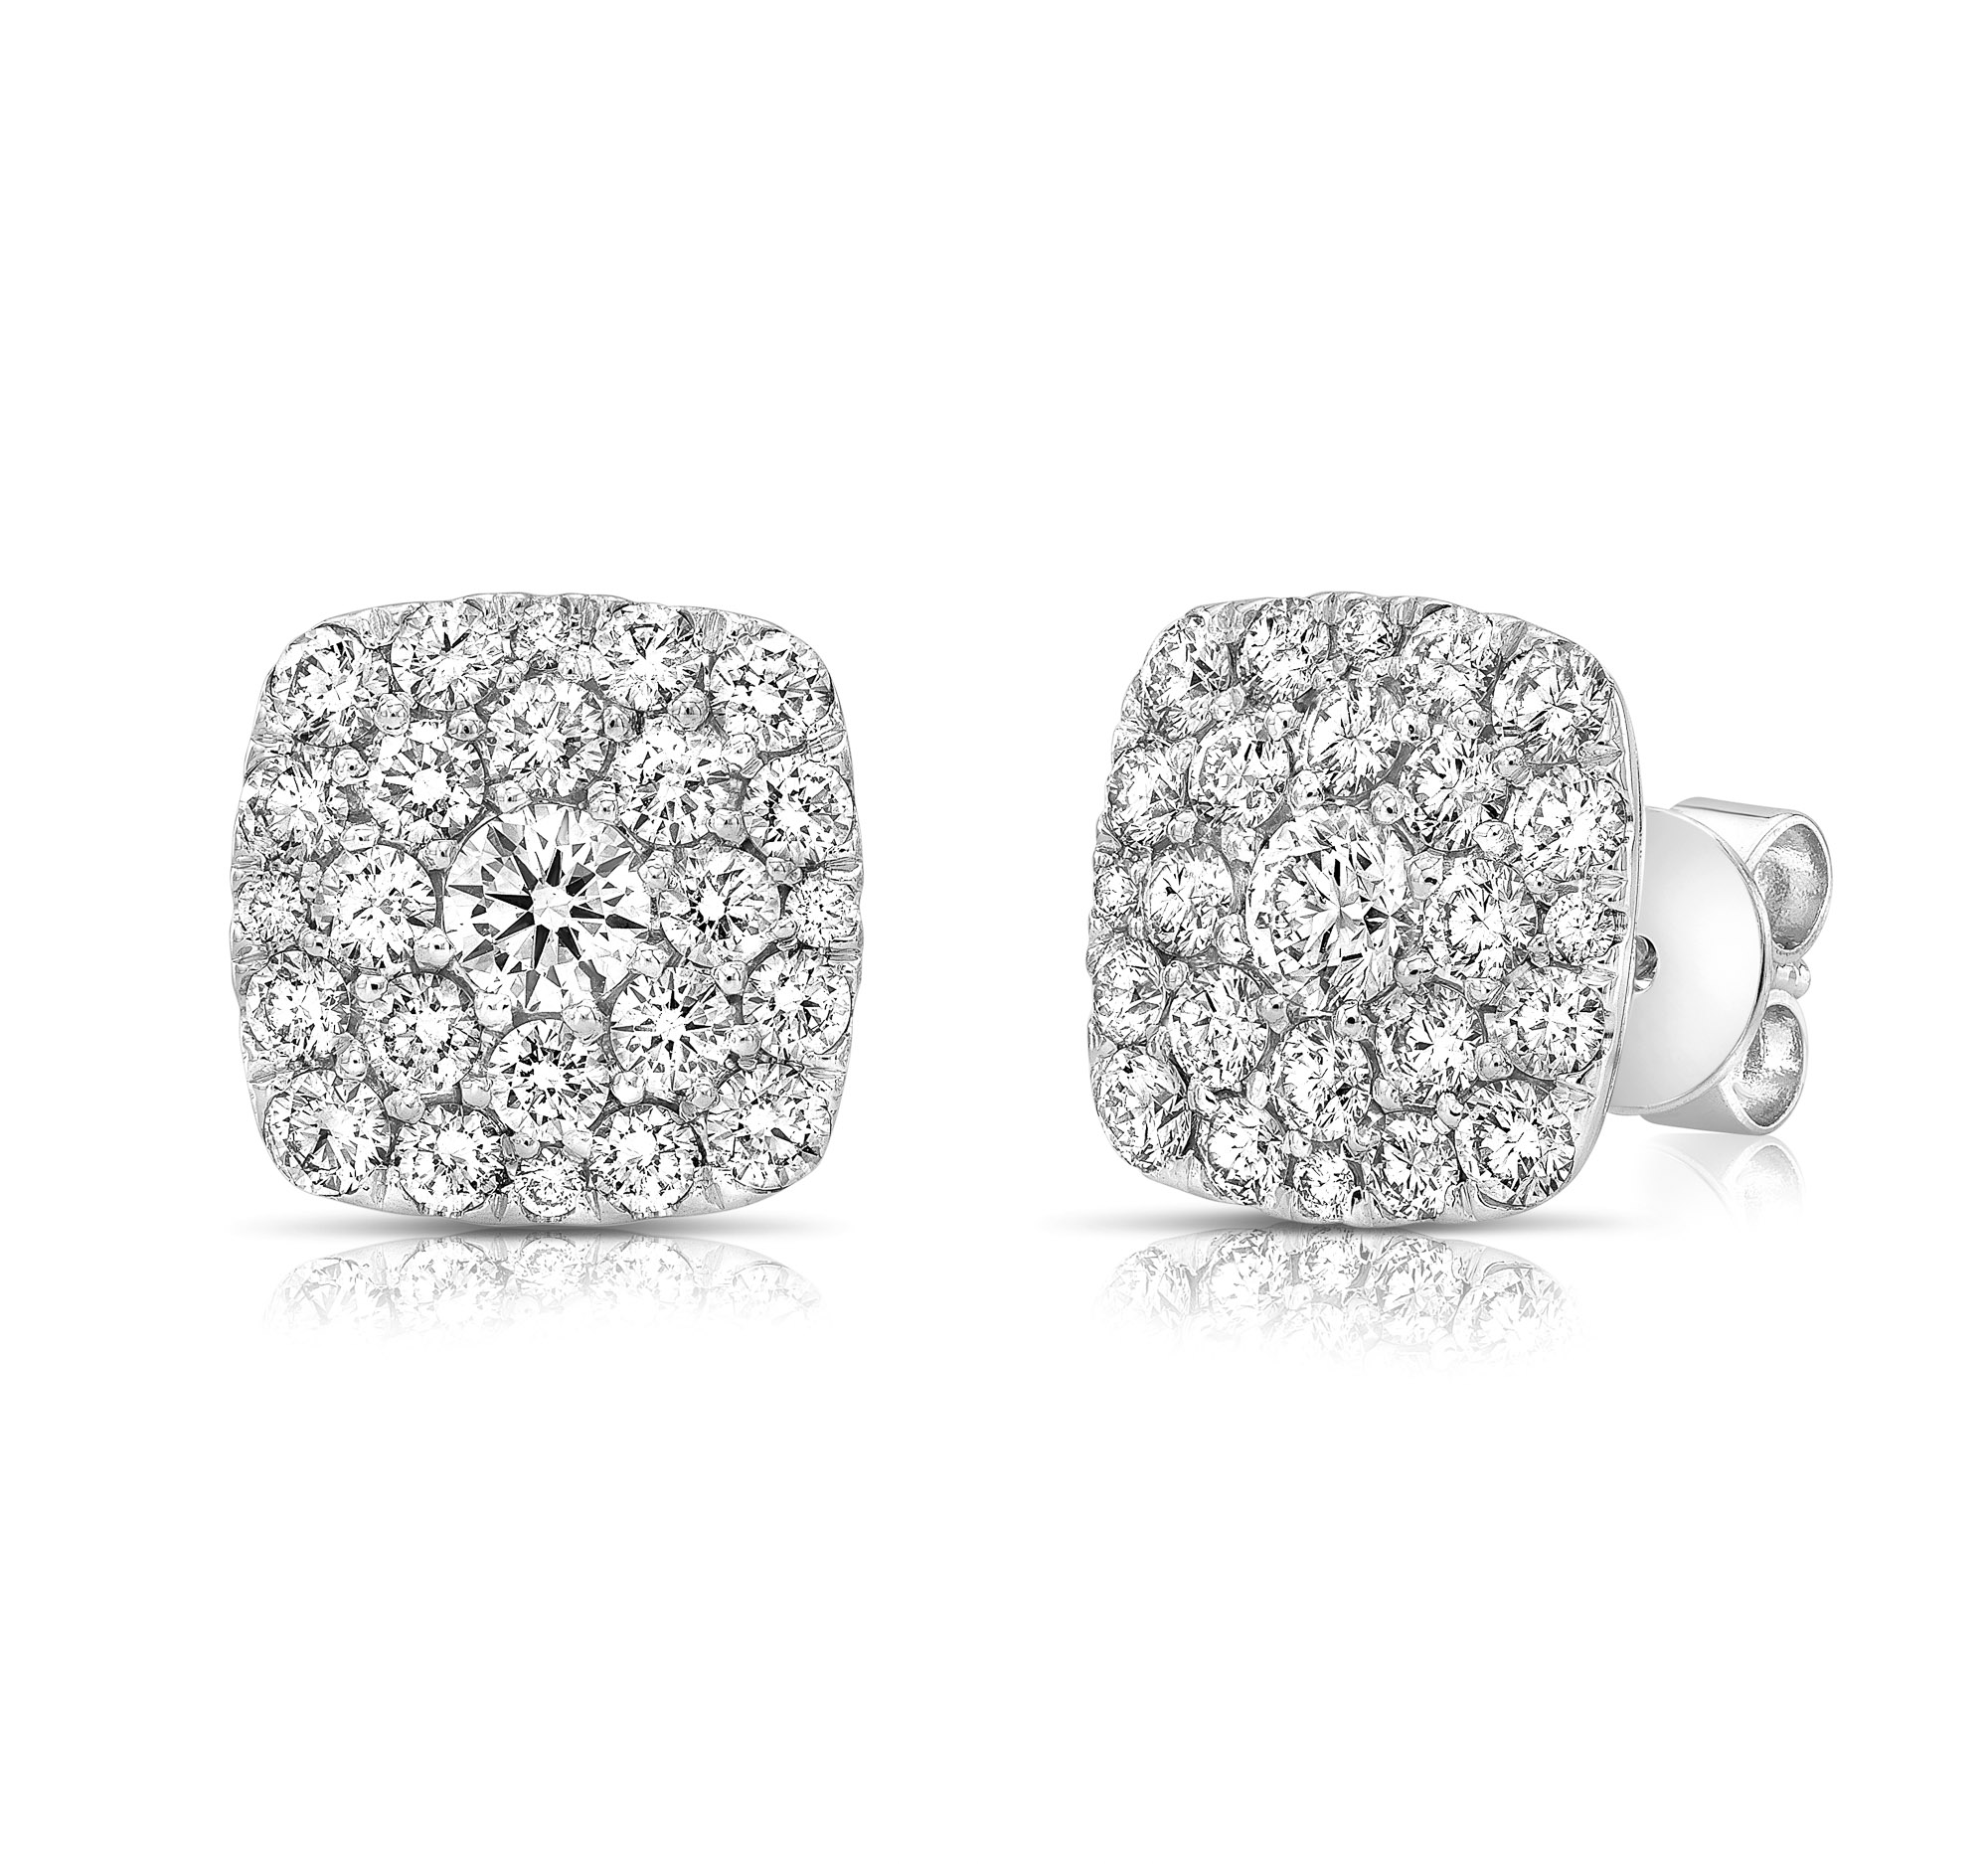 White Gold Cushion Halo Cluster Stud Earrings l 1 3/4ctw